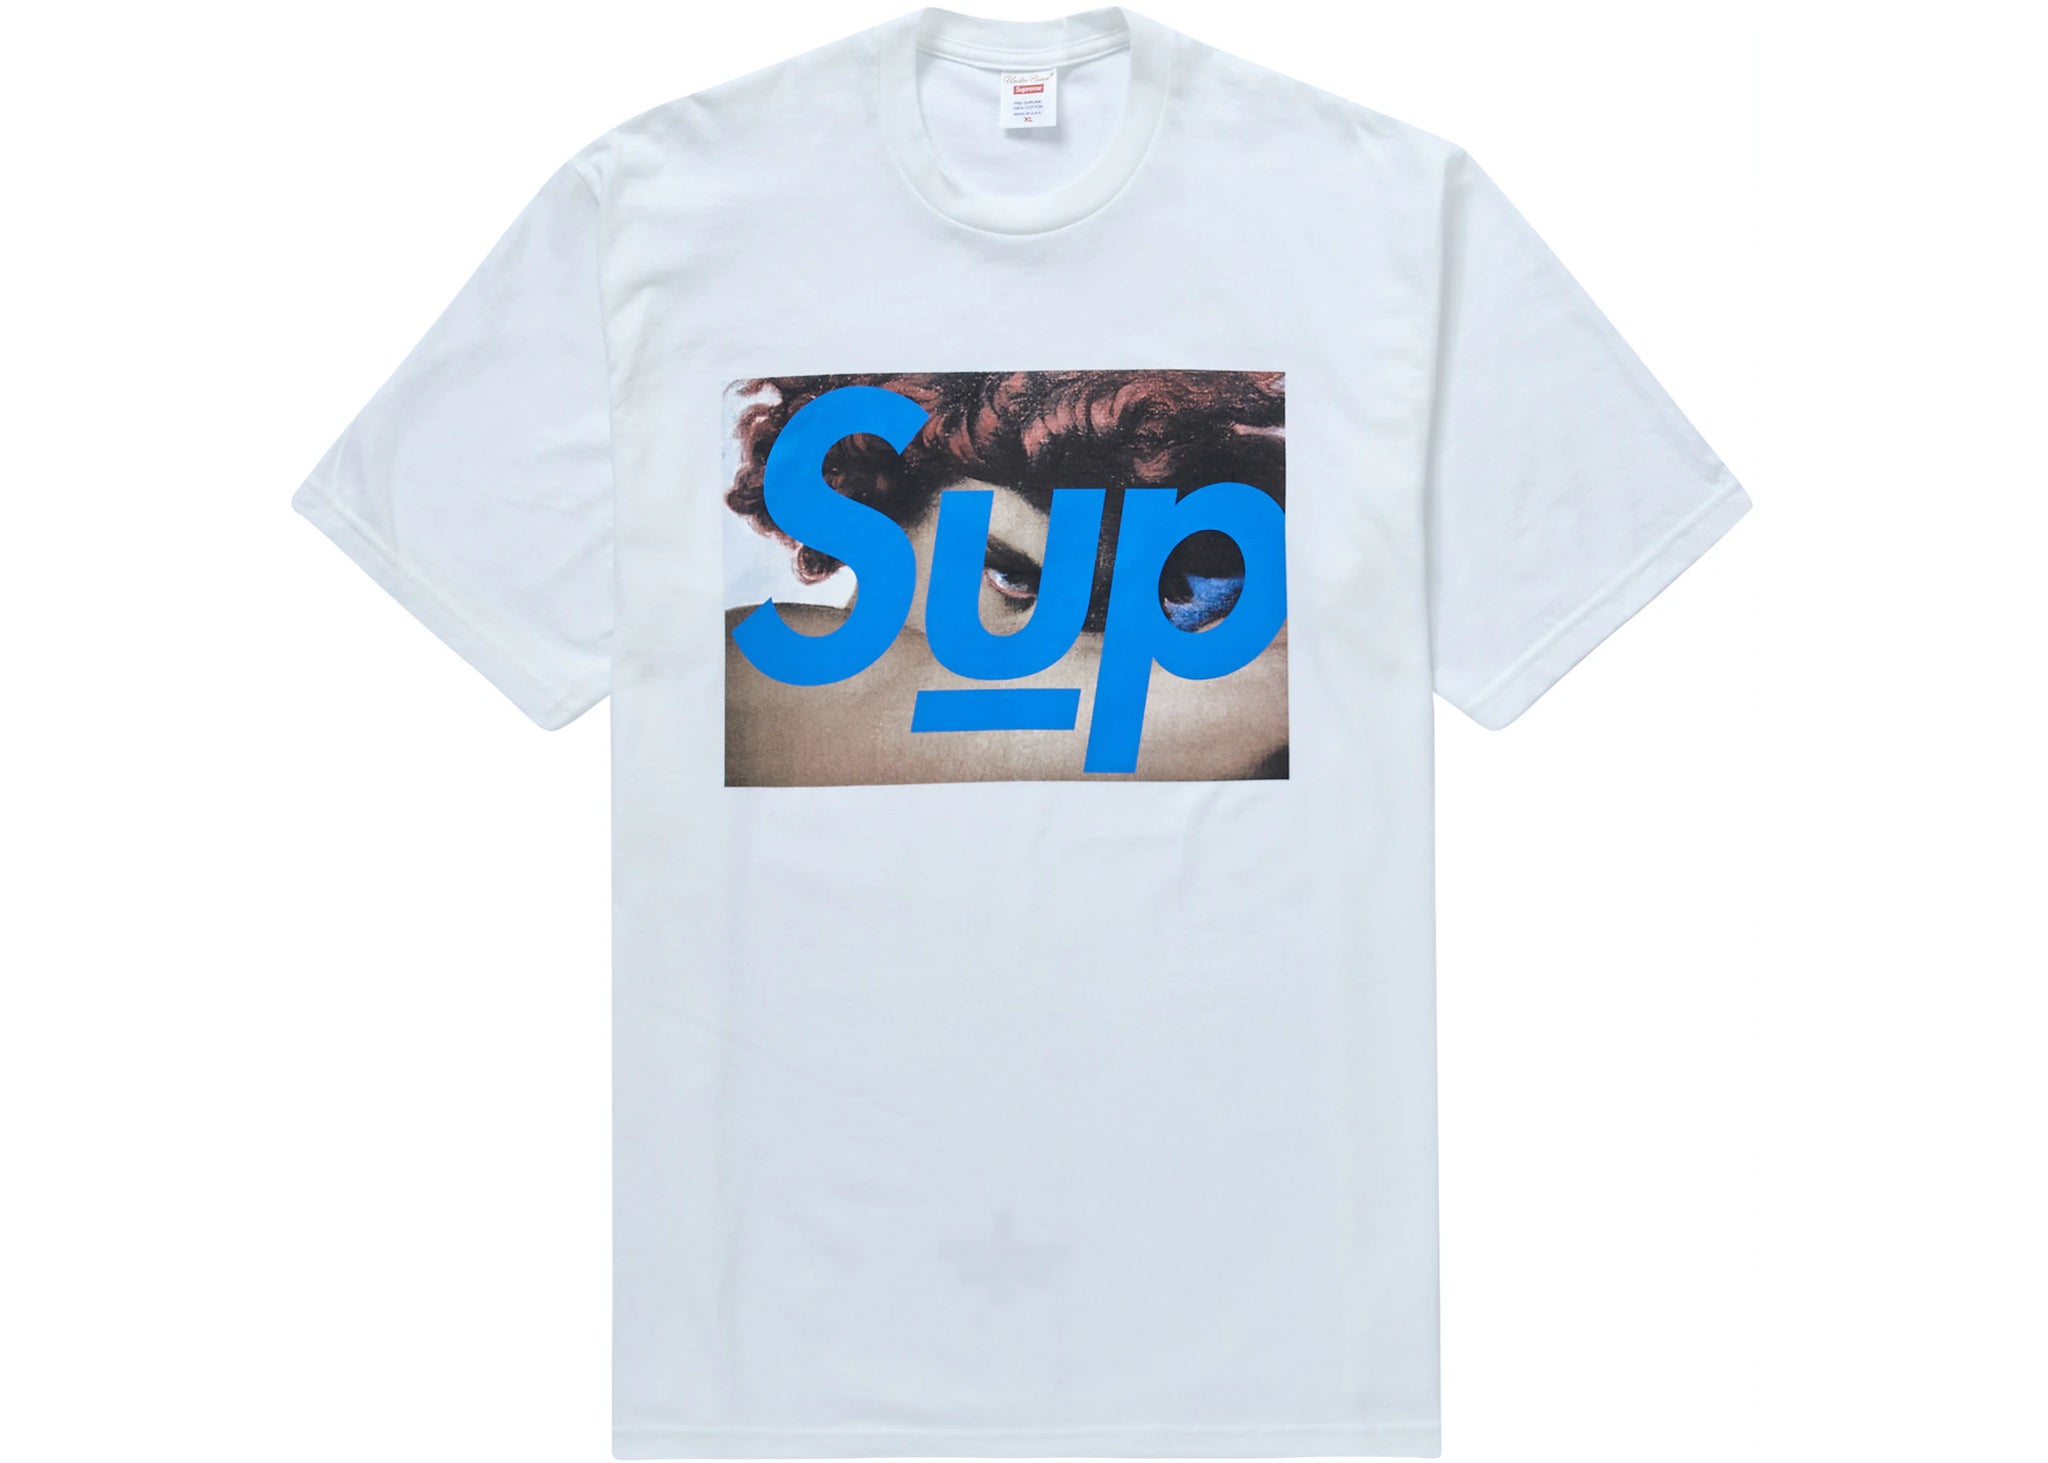 Supreme X Undercover "Face Tee"